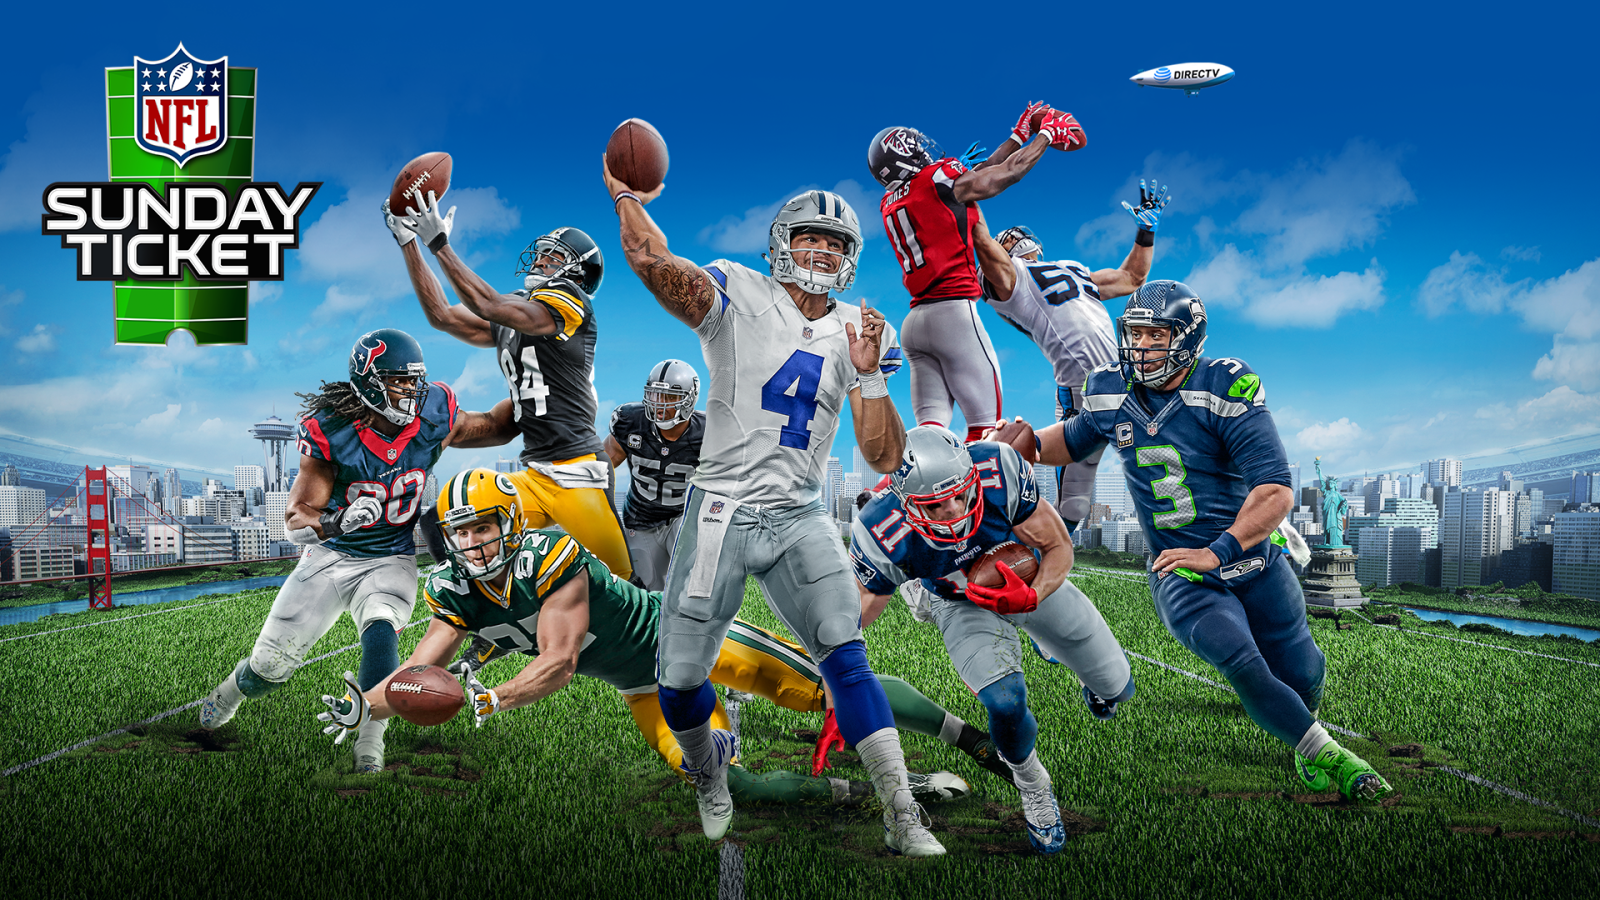 NFL Sunday Ticket drops to 80 for students w/ this promo code 9to5Toys